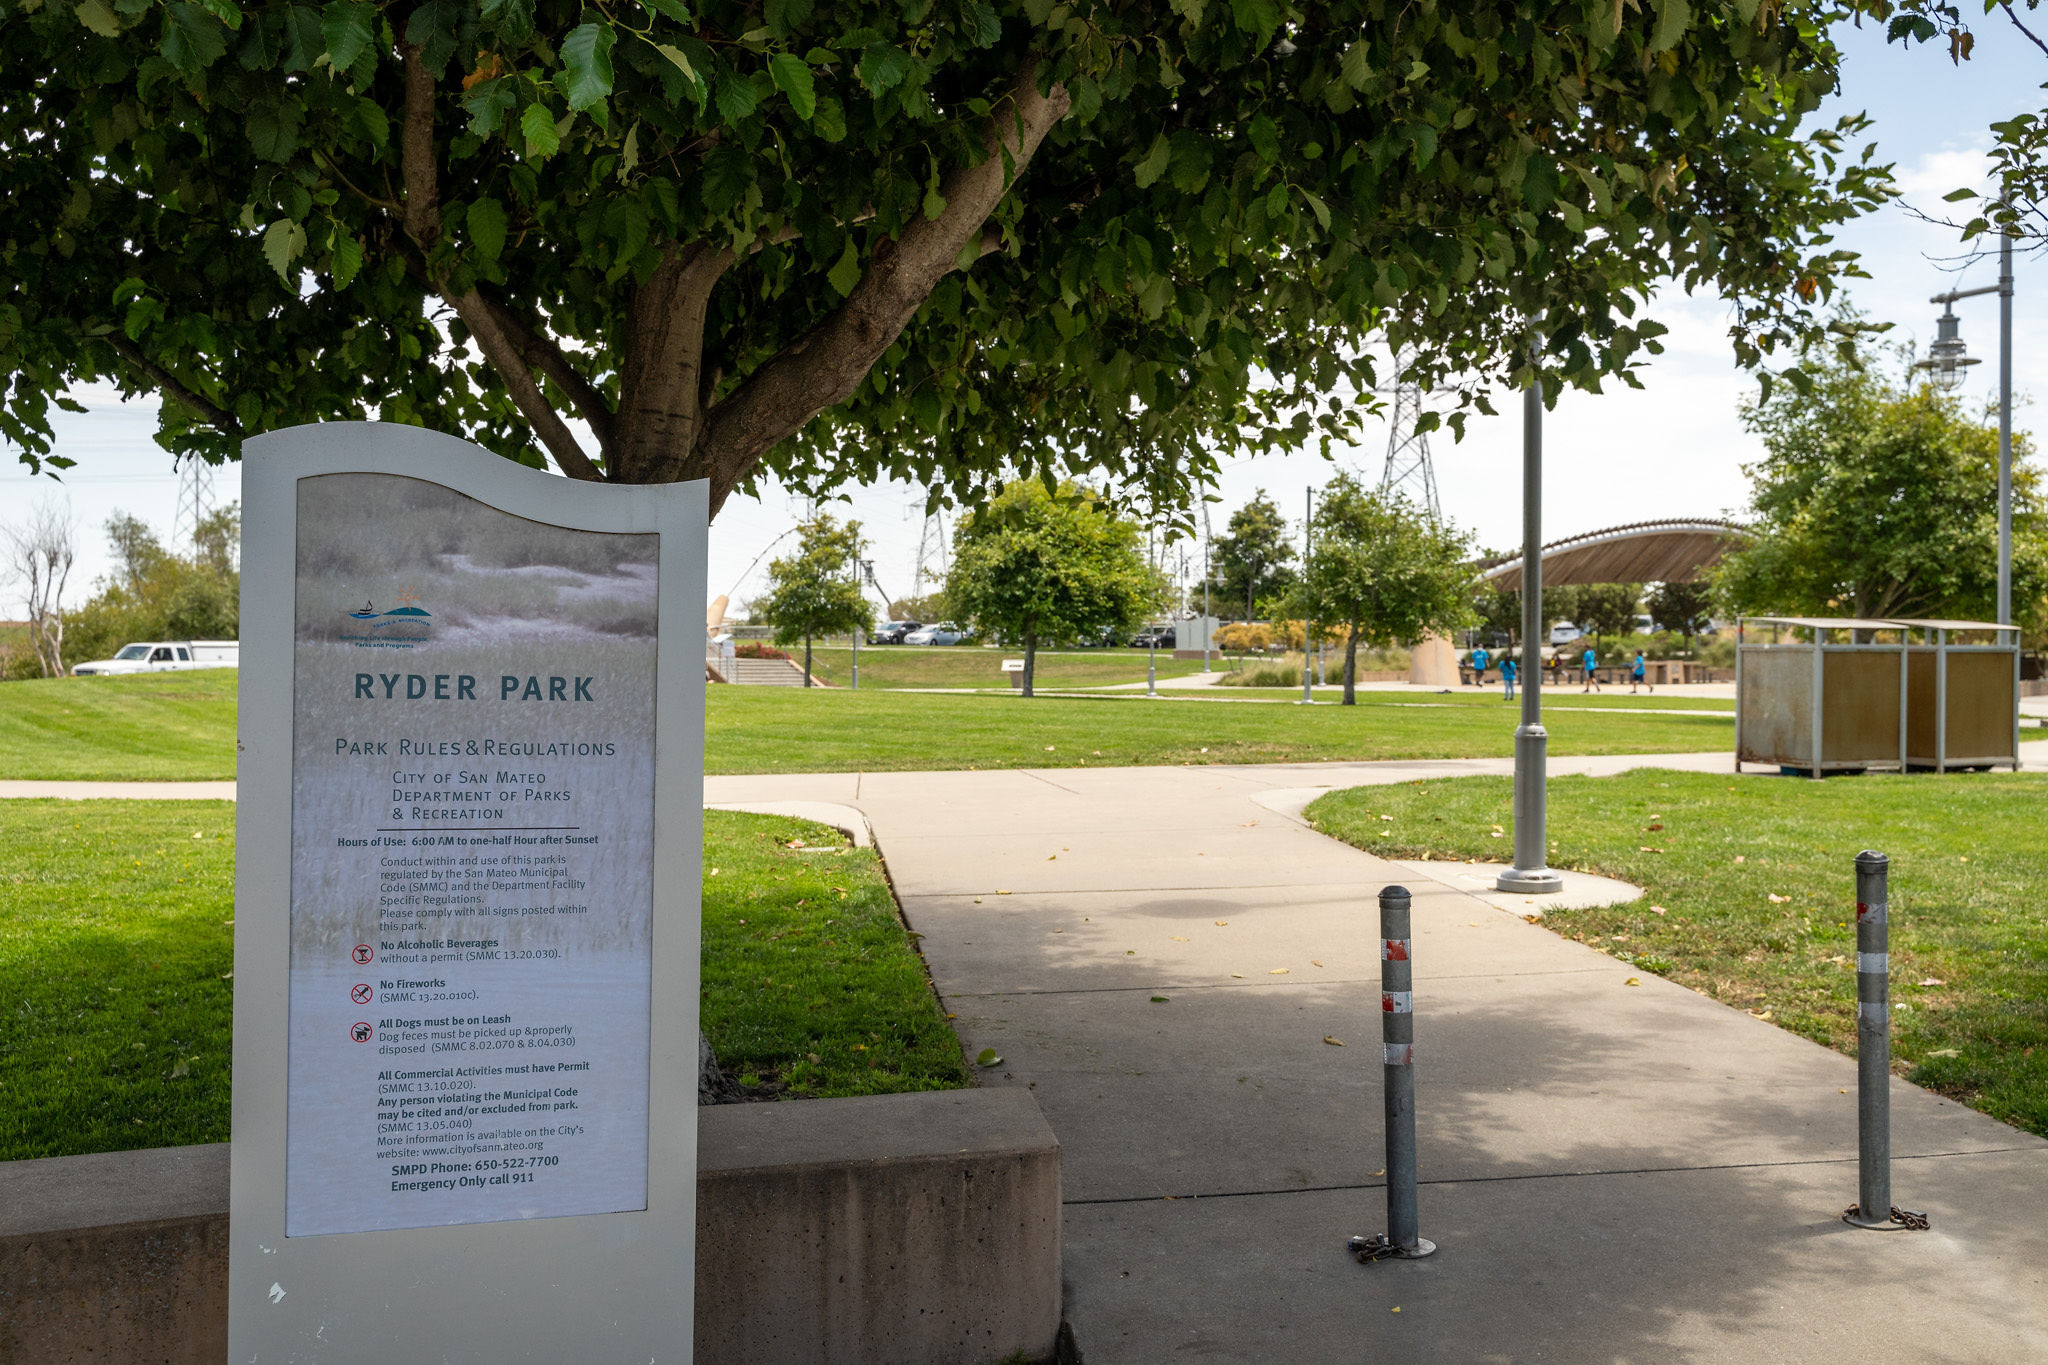 Ryder Park in the Shoreview area in San Mateo